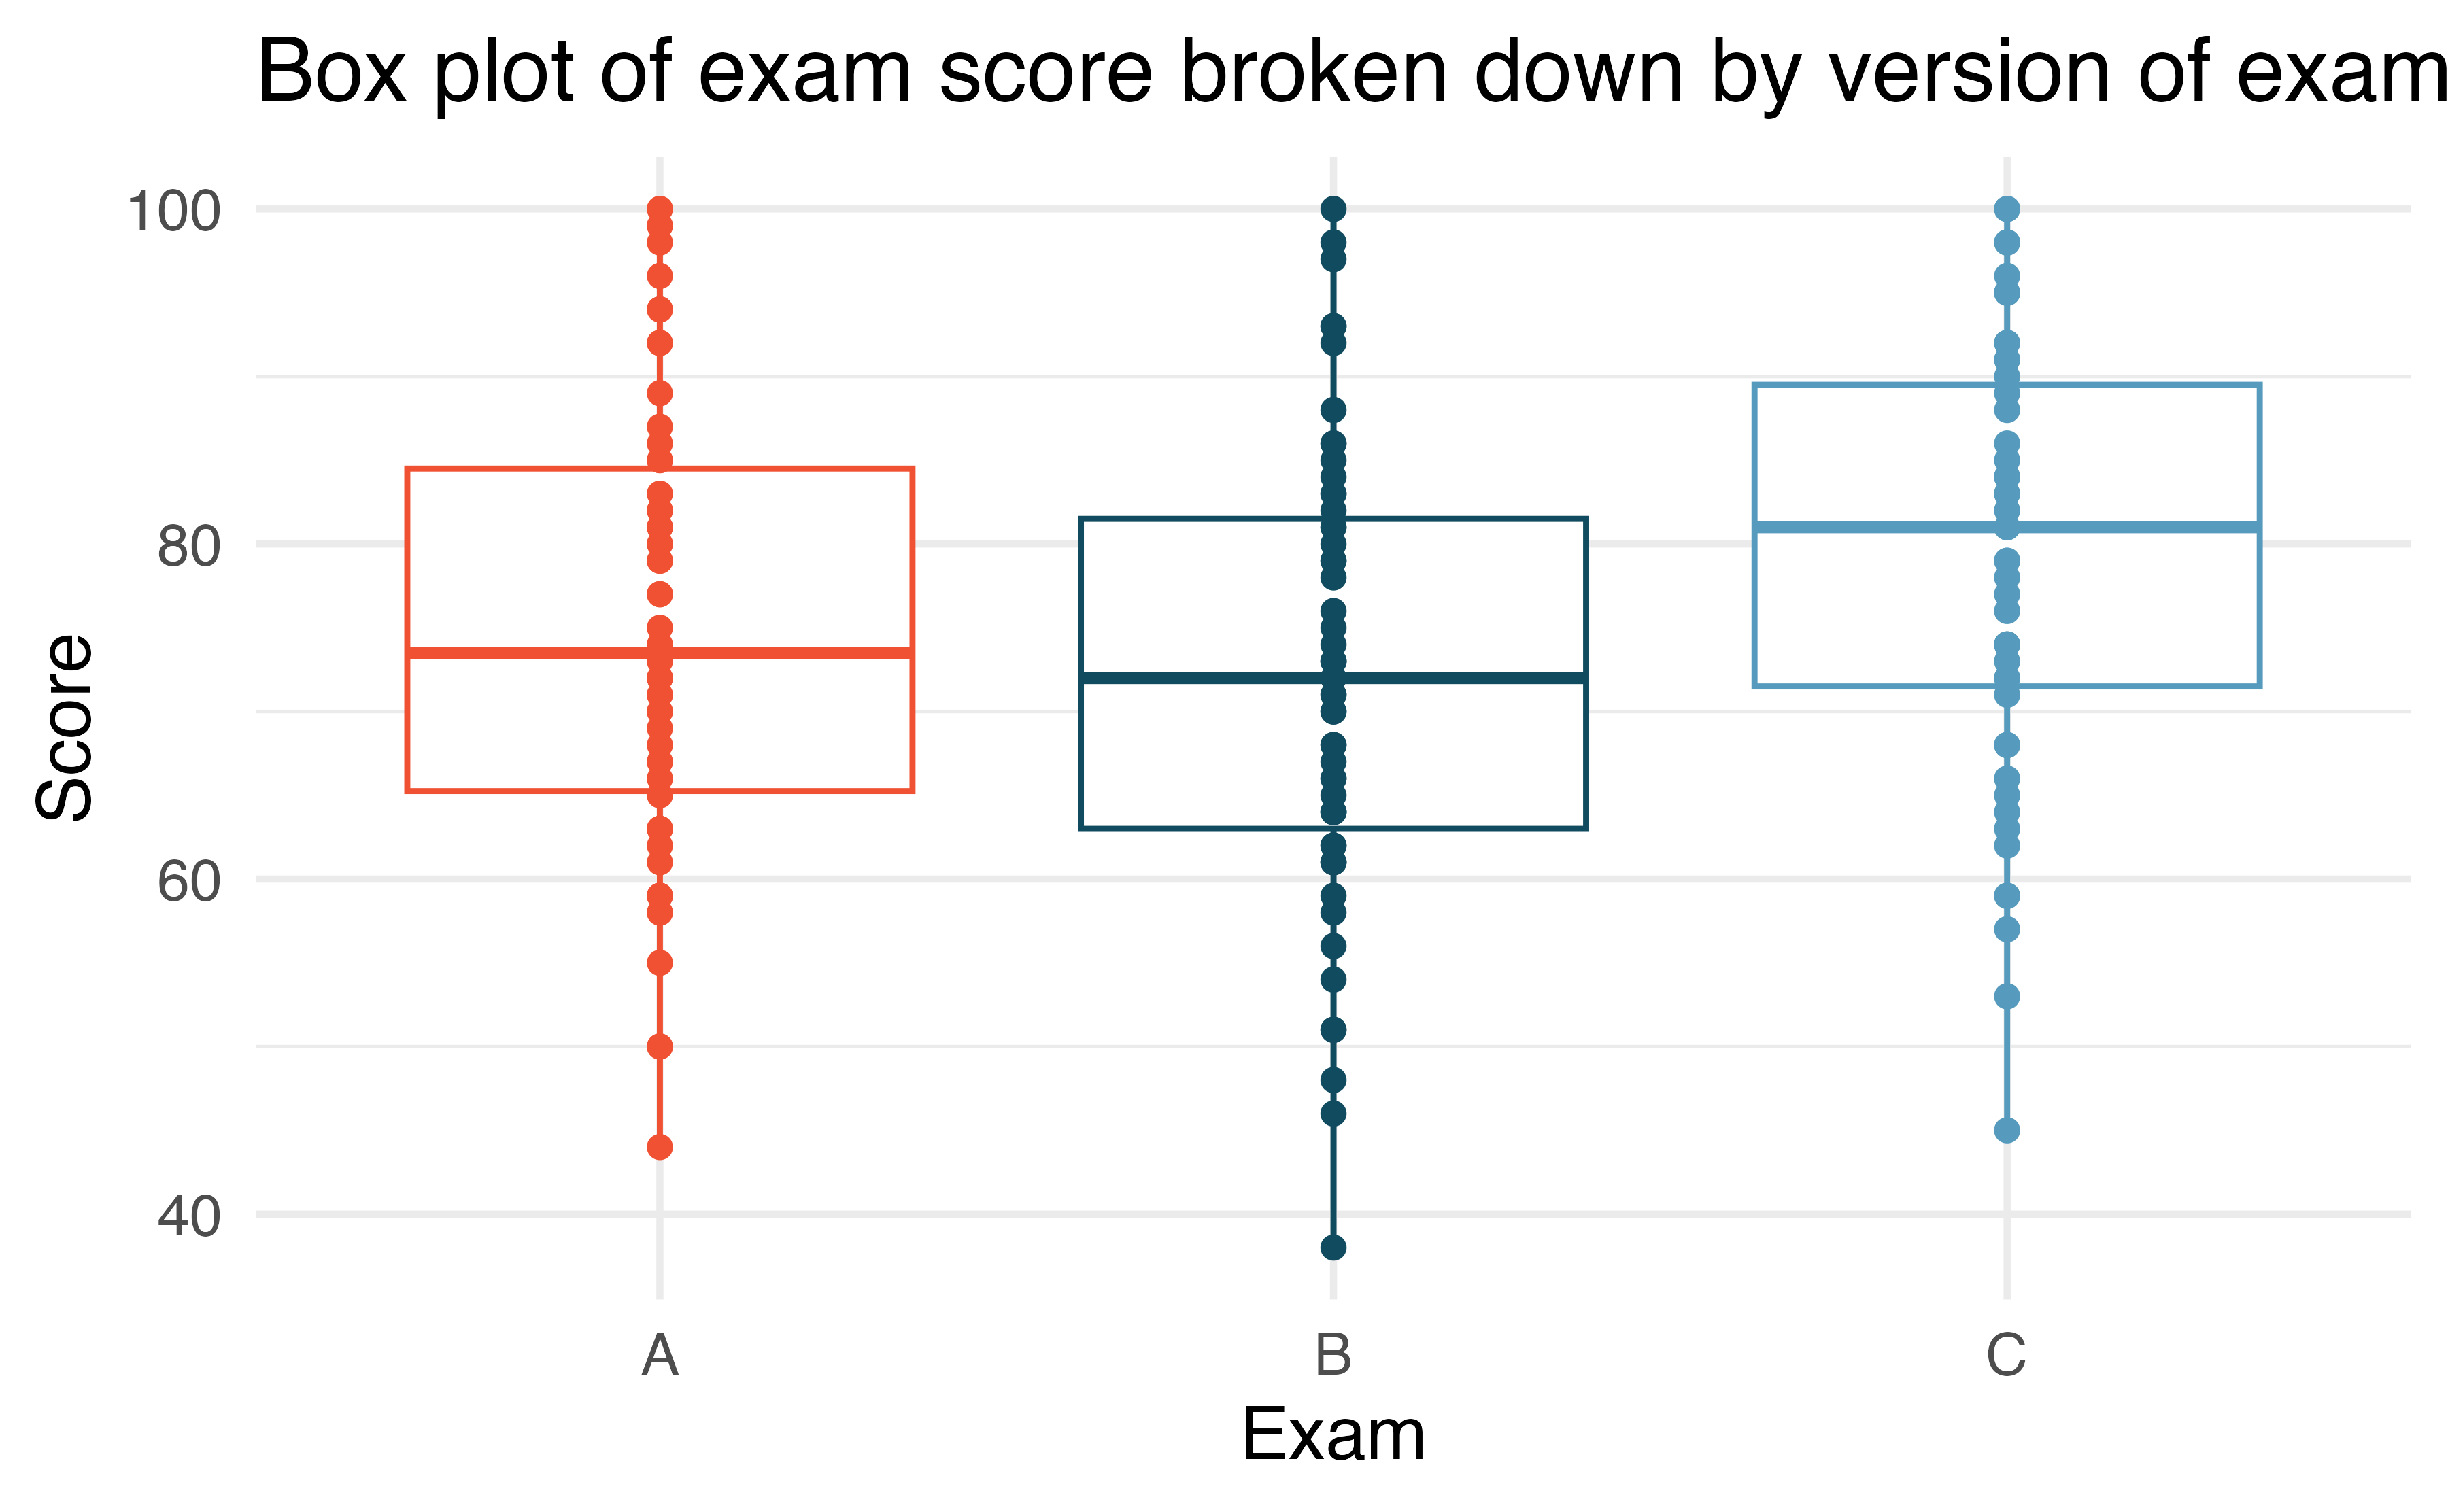 Side-by-side boxplots of exam score boken down by exam A, exam B, or exam C. Exam C's median is above 80 which is higher than exam A with a median around 74 and exam B with a median around 72.